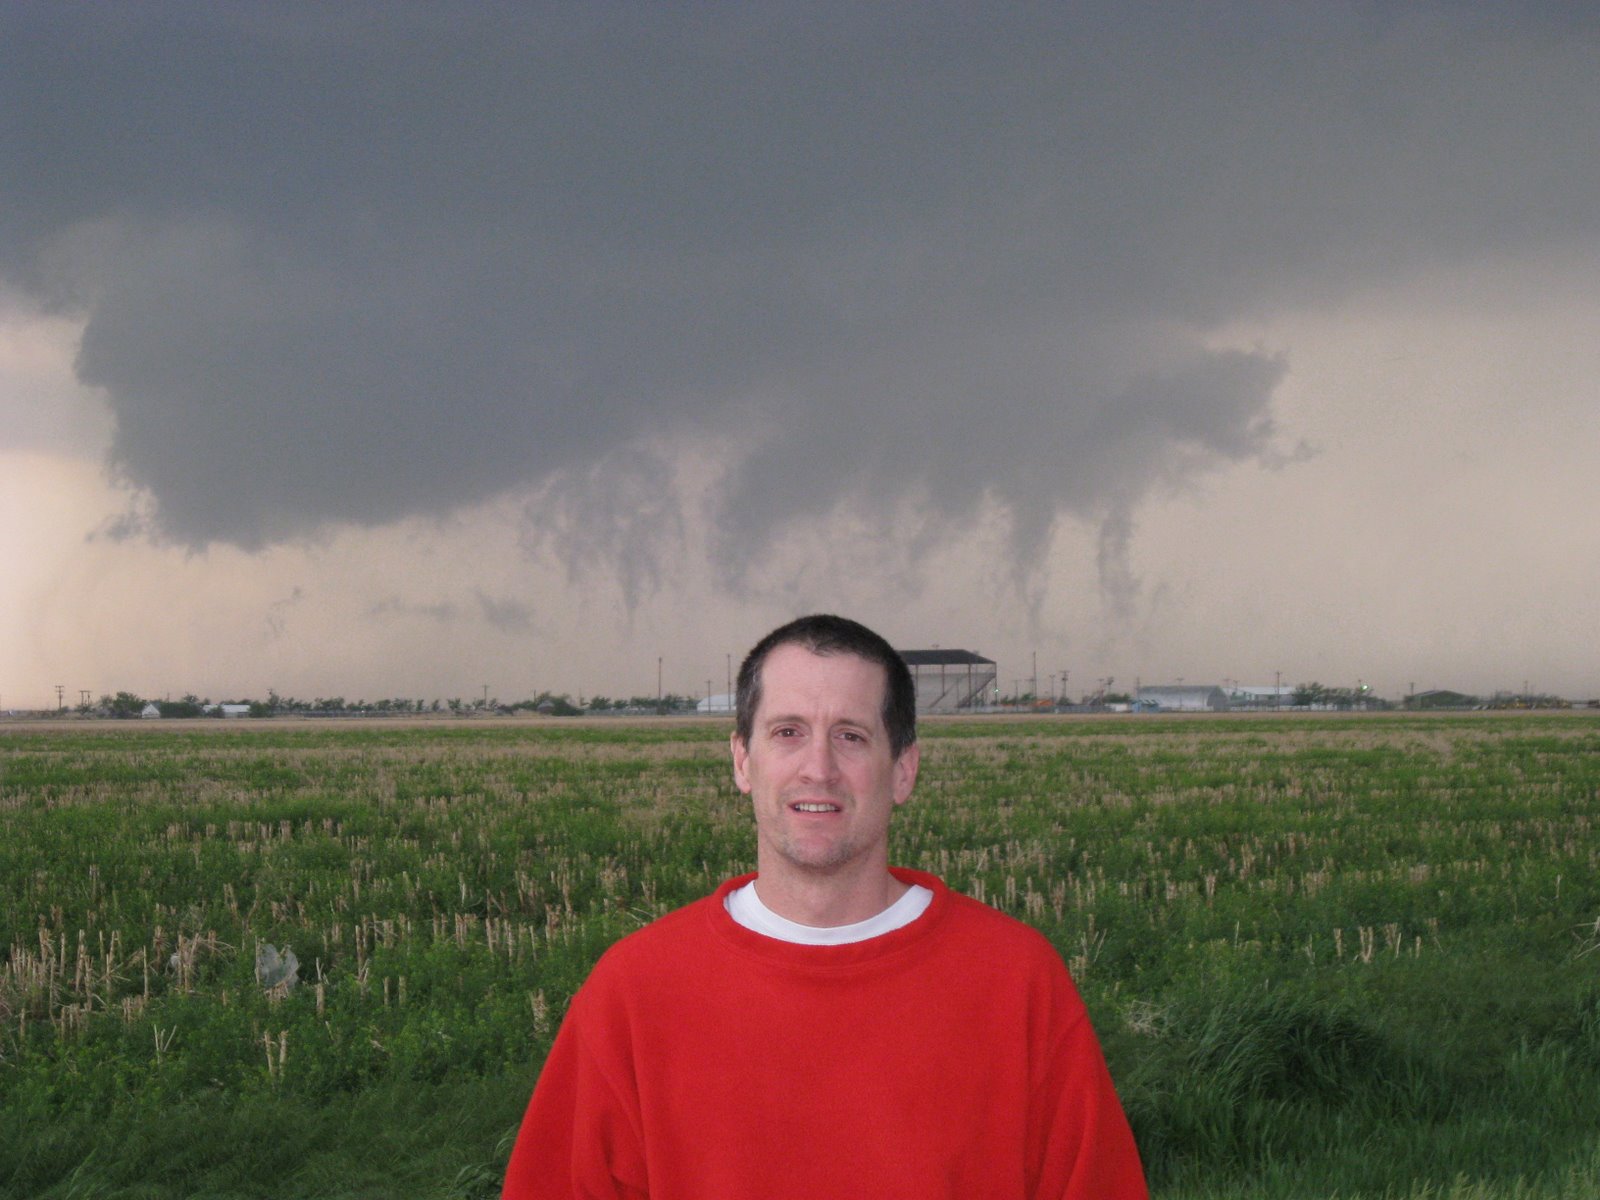 Chasing Tornados in Midwest